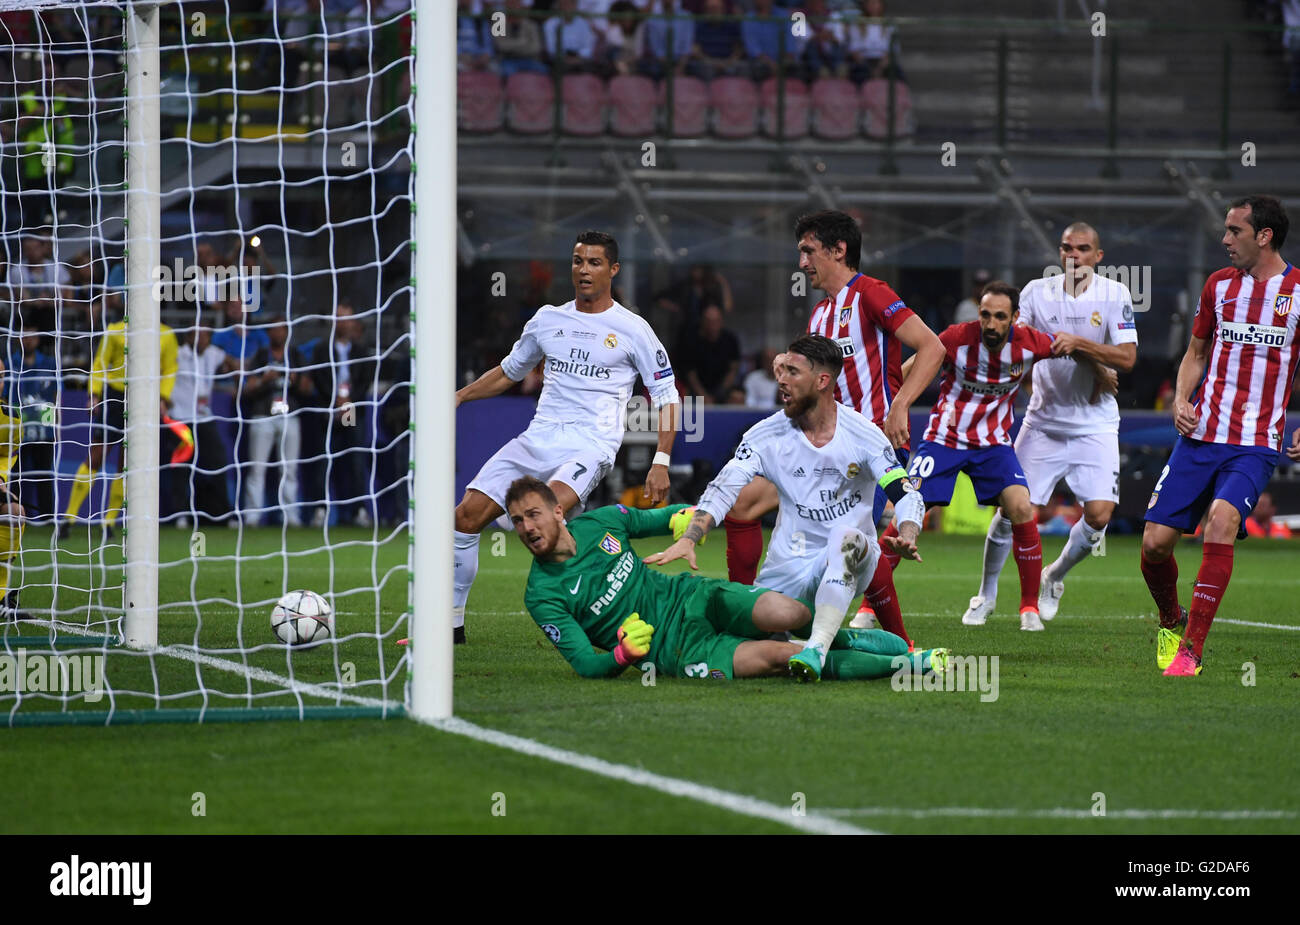 Milan, Italy. 28th May, 2016. Sergio Ramos (3rd L) of Real Madrid scores during the UEFA Champions League Final match between Real Madrid and Atletico Madrid in Milan, Italy, May 28, 2016. Real Madrid won over Atletico Madrid 5-3 on penalties after a 1-1 draw and thus claimed the title. Credit:  Alberto Lingria/Xinhua/Alamy Live News Stock Photo